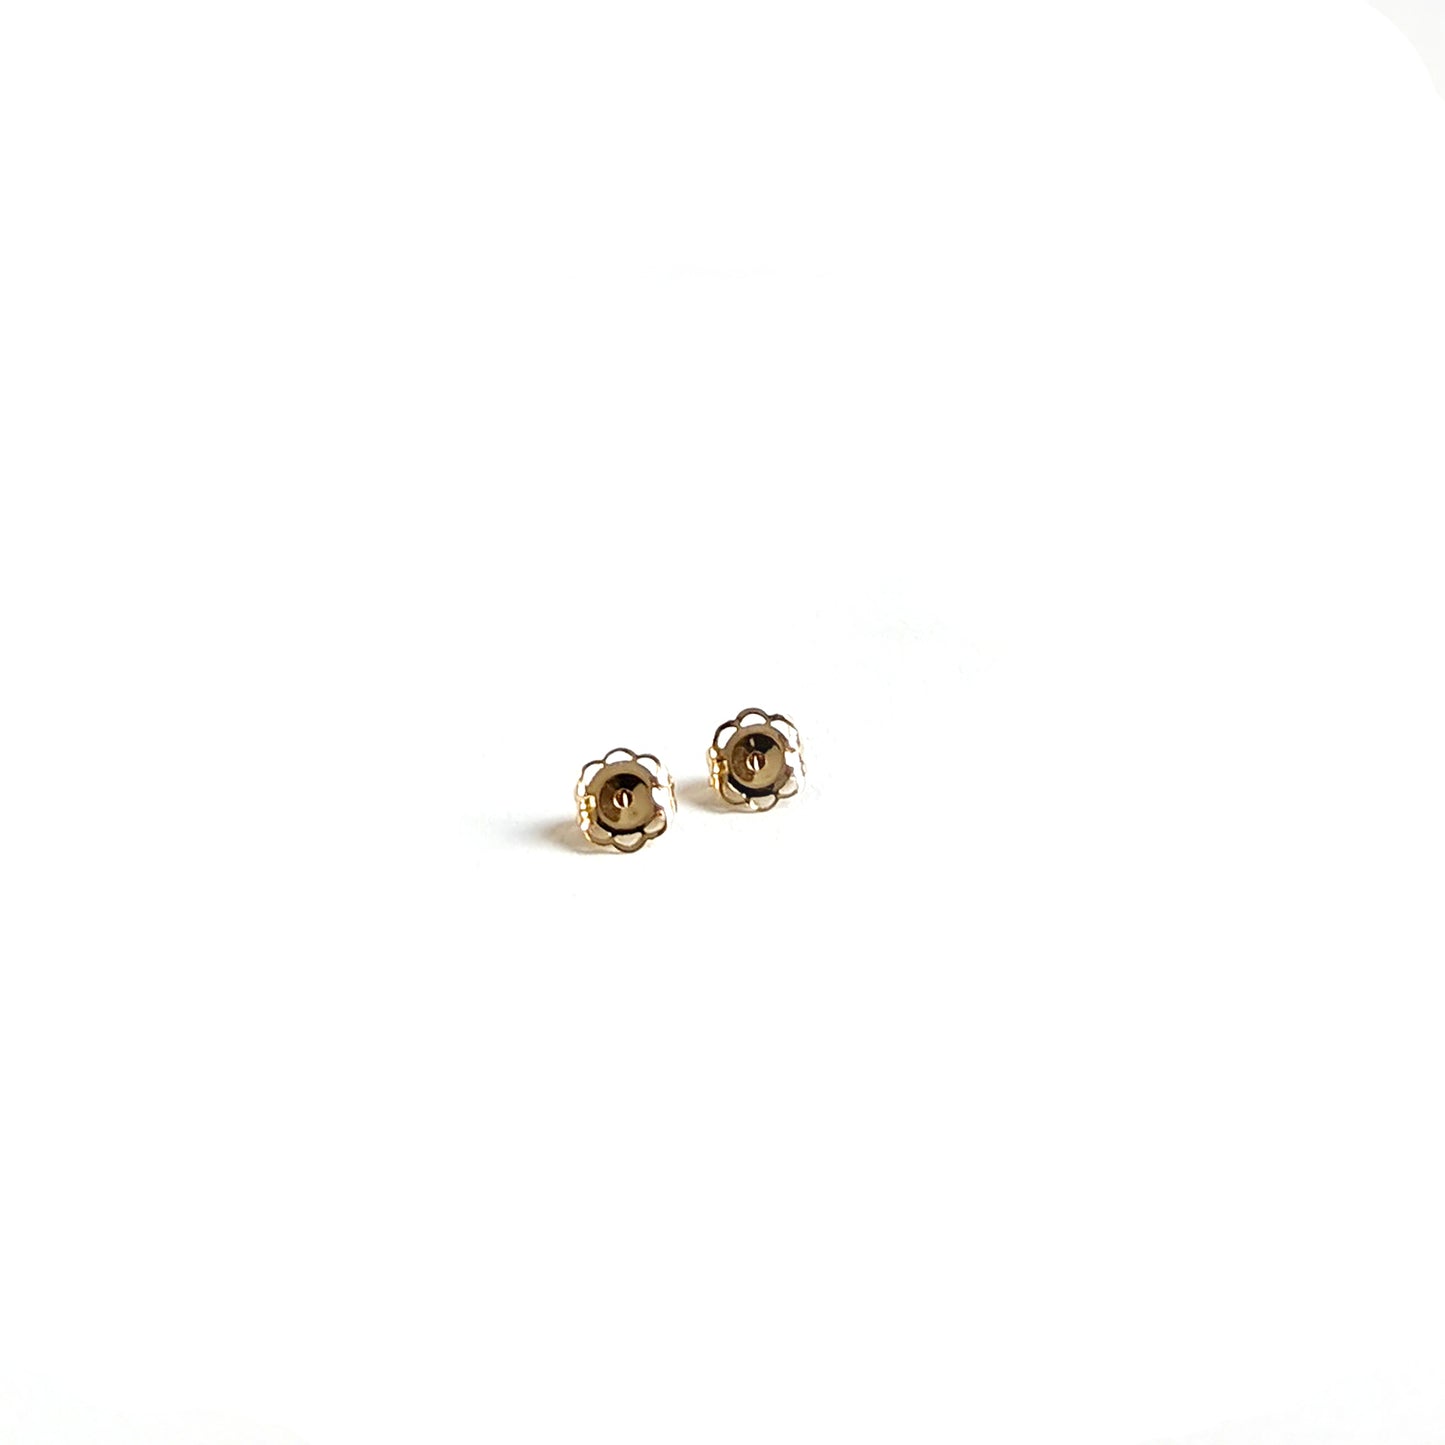 14k gold earring backs, 14k gold earring backs Suppliers and Manufacturers  at